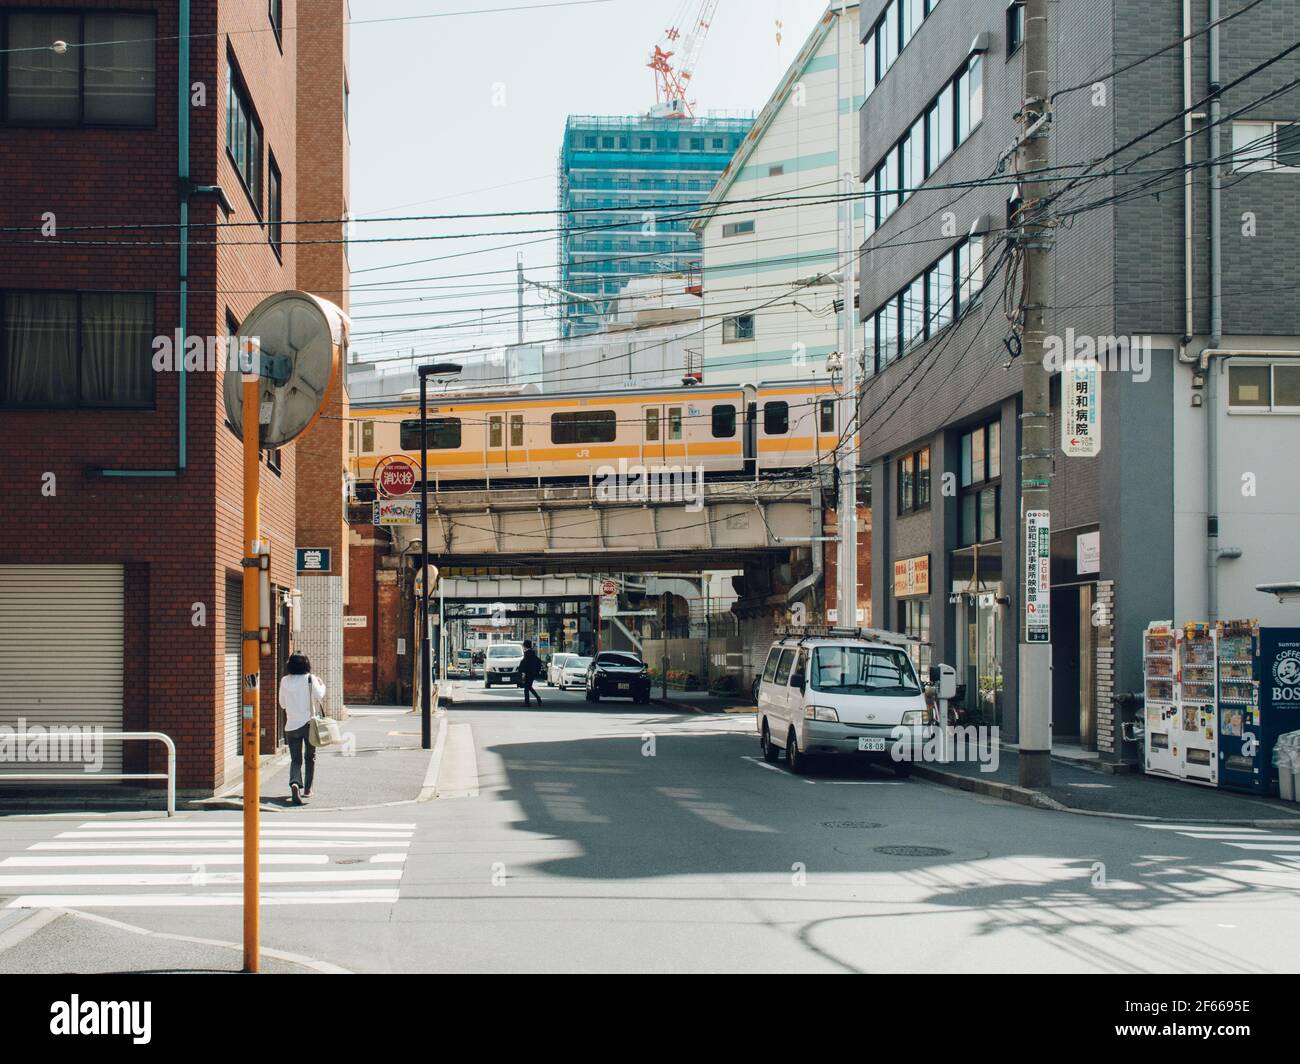 Tokyo, Japan - Small street with the train running on the elevated railway. Quiet side street with a few people and cars. Stock Photo